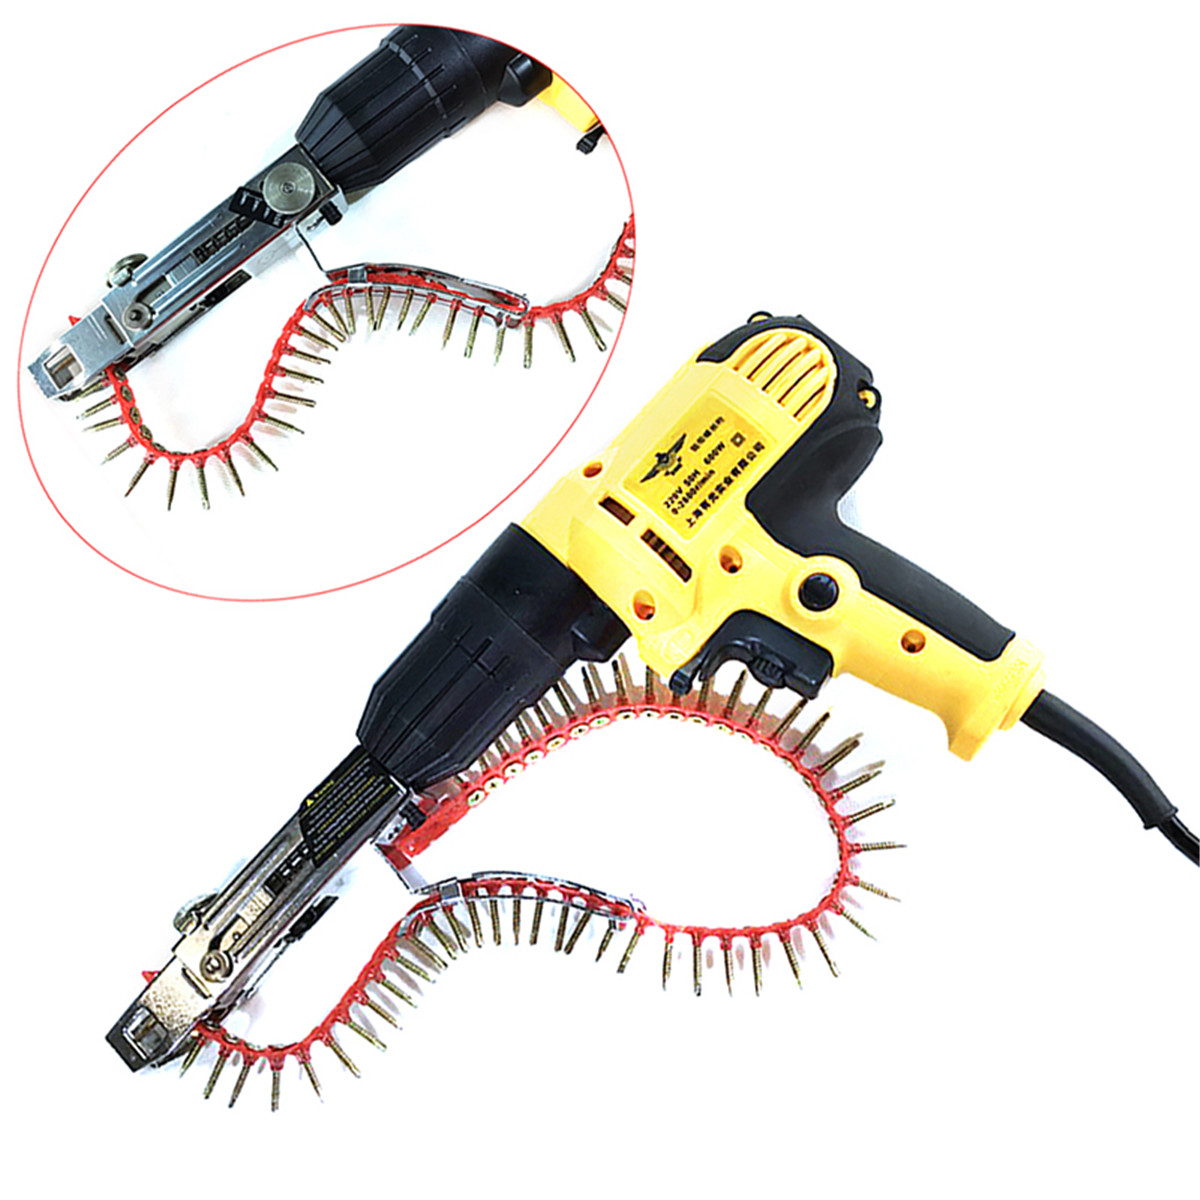 Drillpro Automatic Chain Nail Gun Adapter Screw Gun for Electric Drill Woodworking Tool Cordless Power Drill Attachment